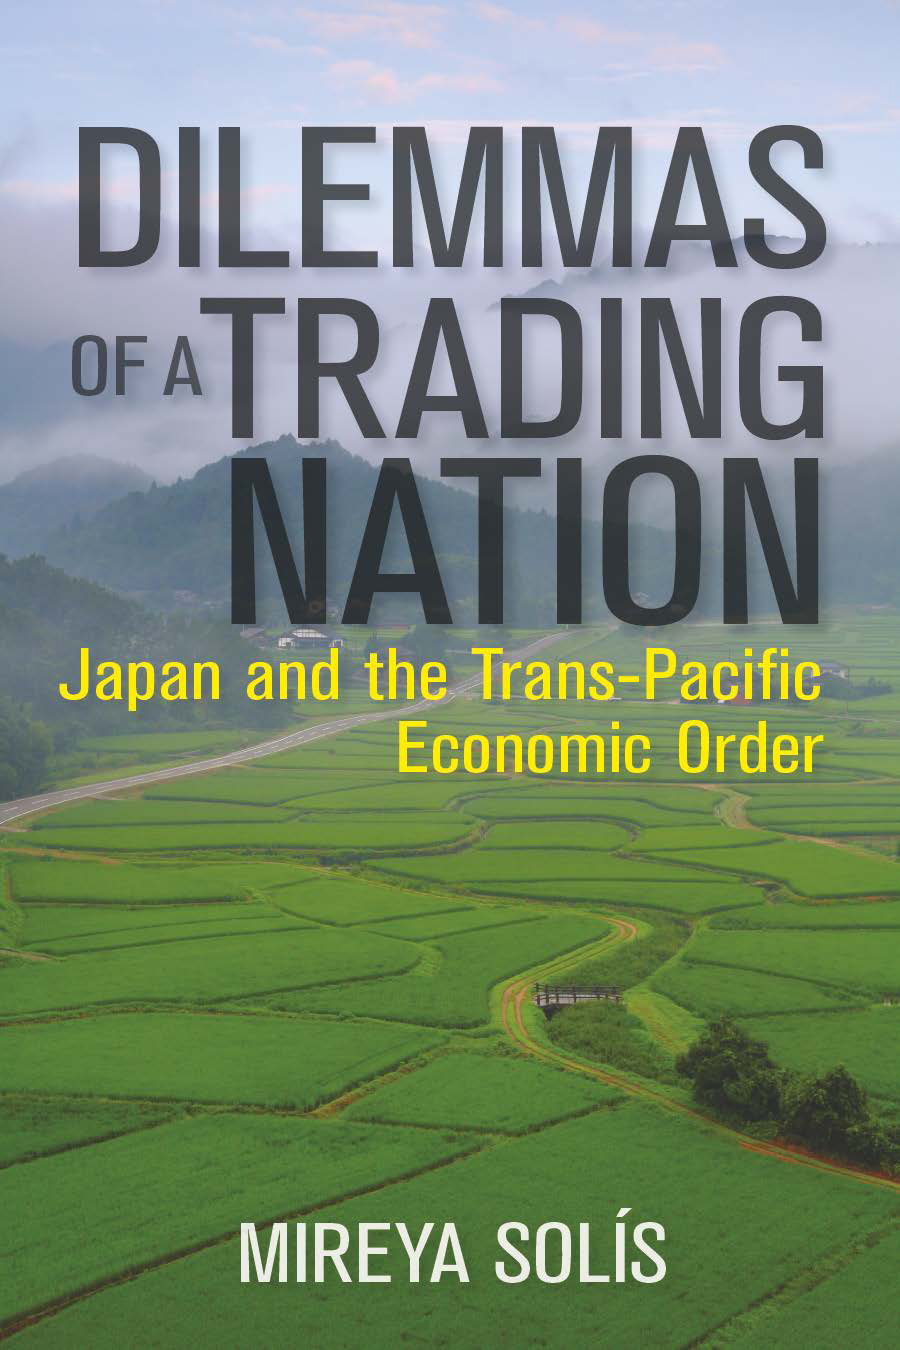 Dilemmas of a Trading Nation: Japan and the United States in the Evolving Asia-Pacific Order